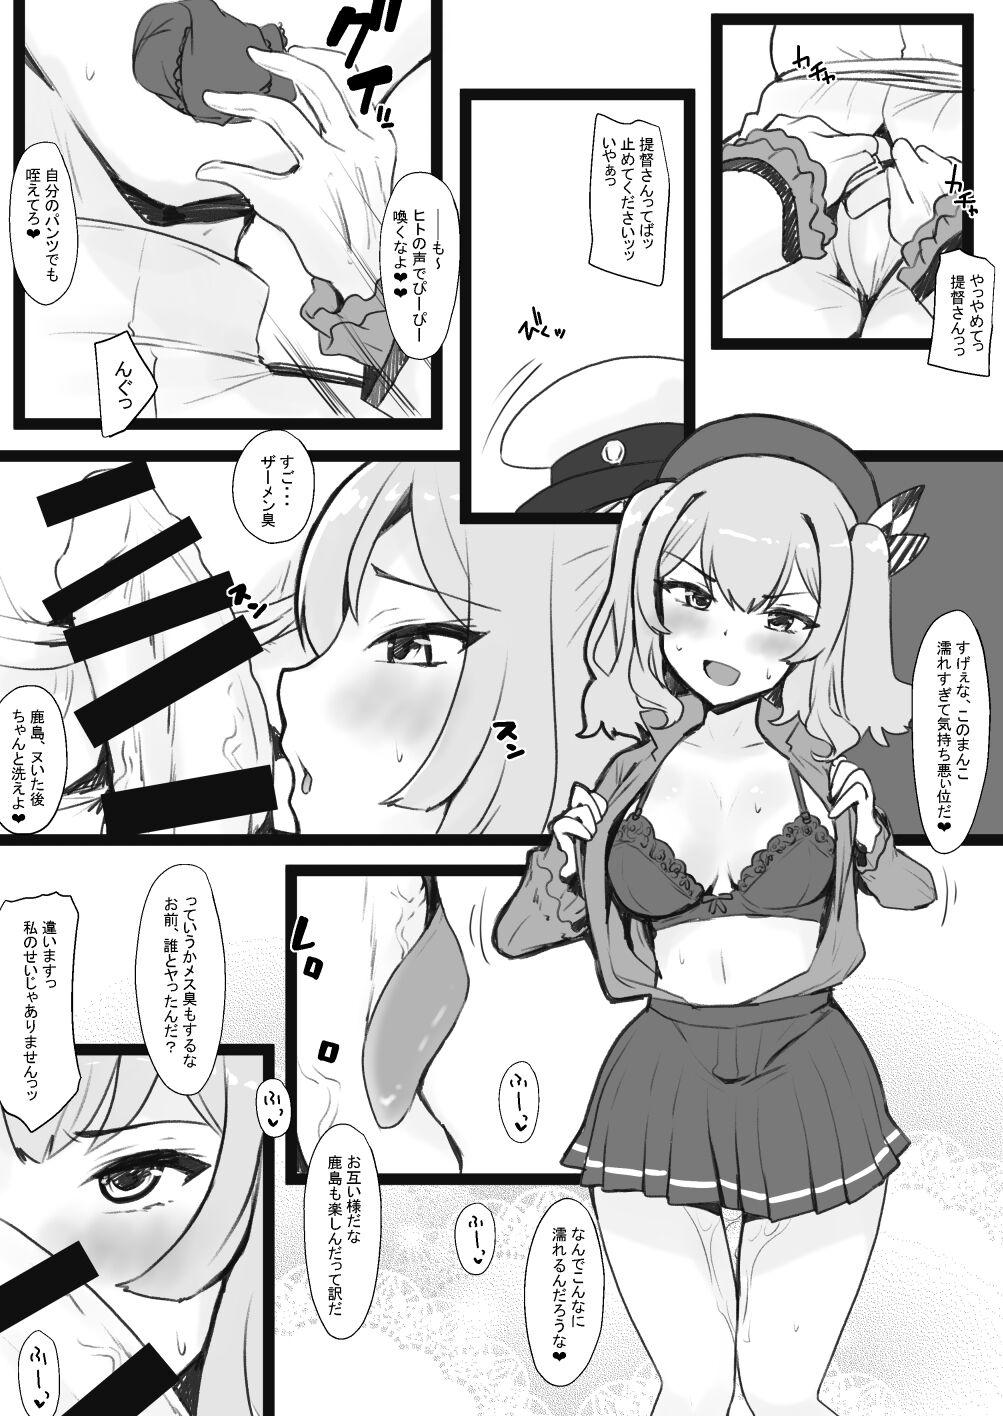 Chat リク - Kantai collection Sapphicerotica - Page 3